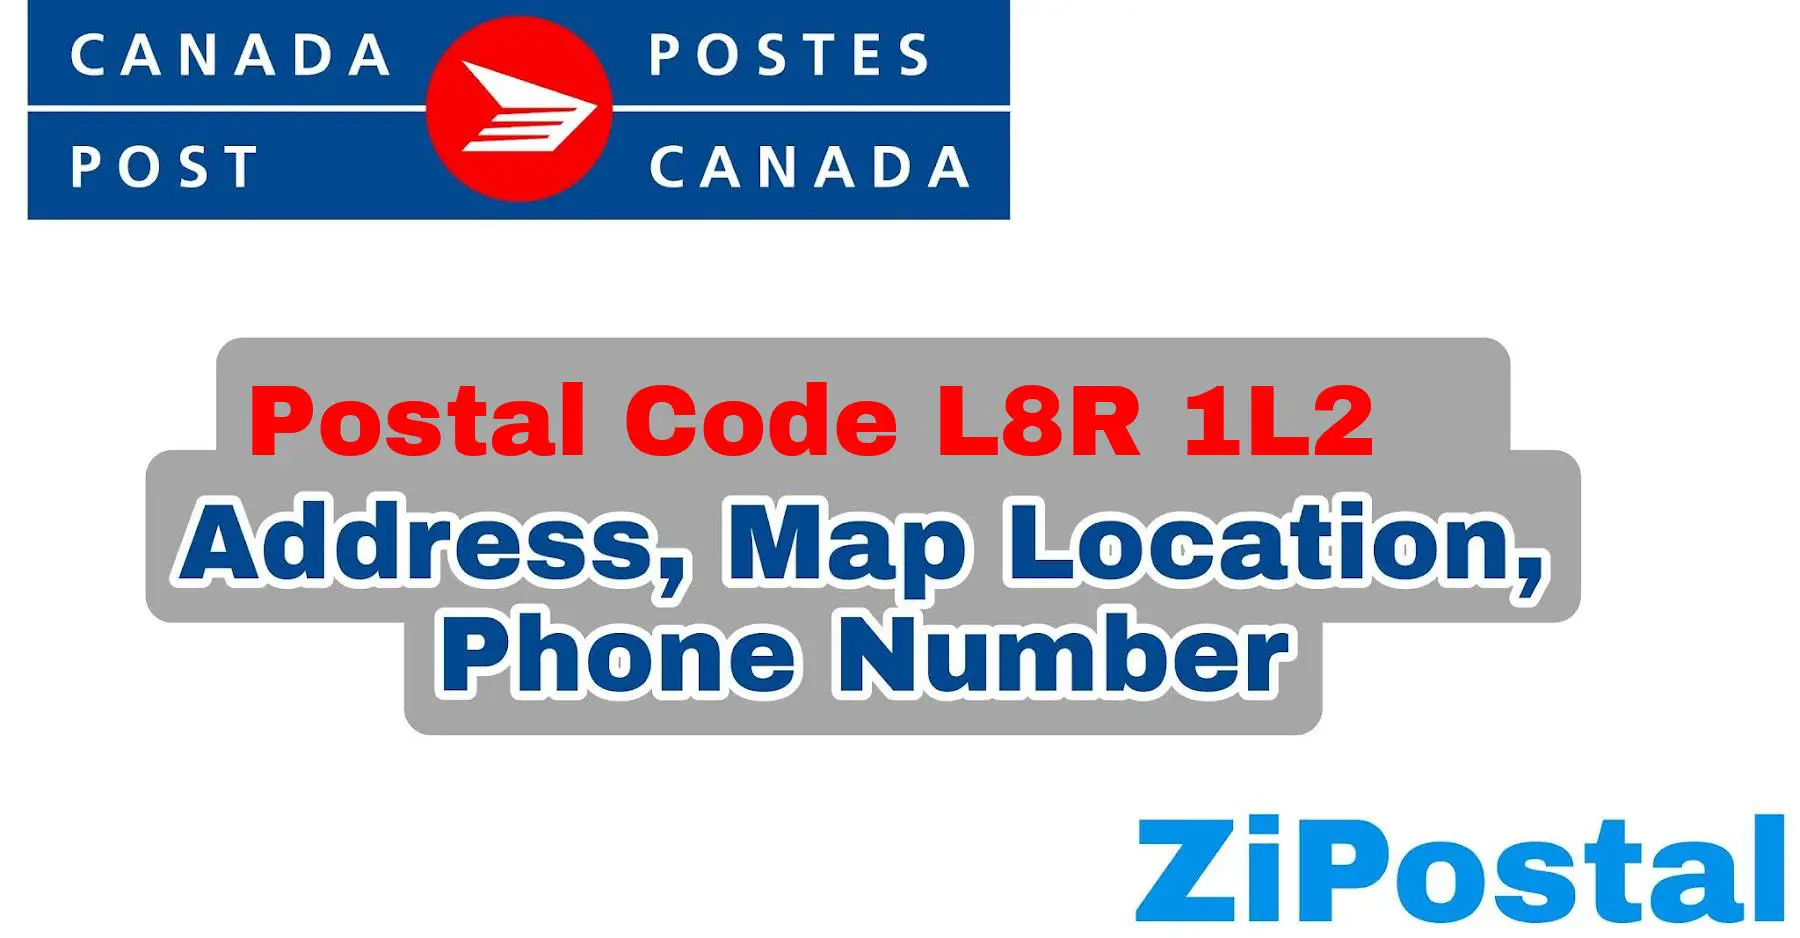 Postal Code L8R 1L2 Address Map Location and Phone Number